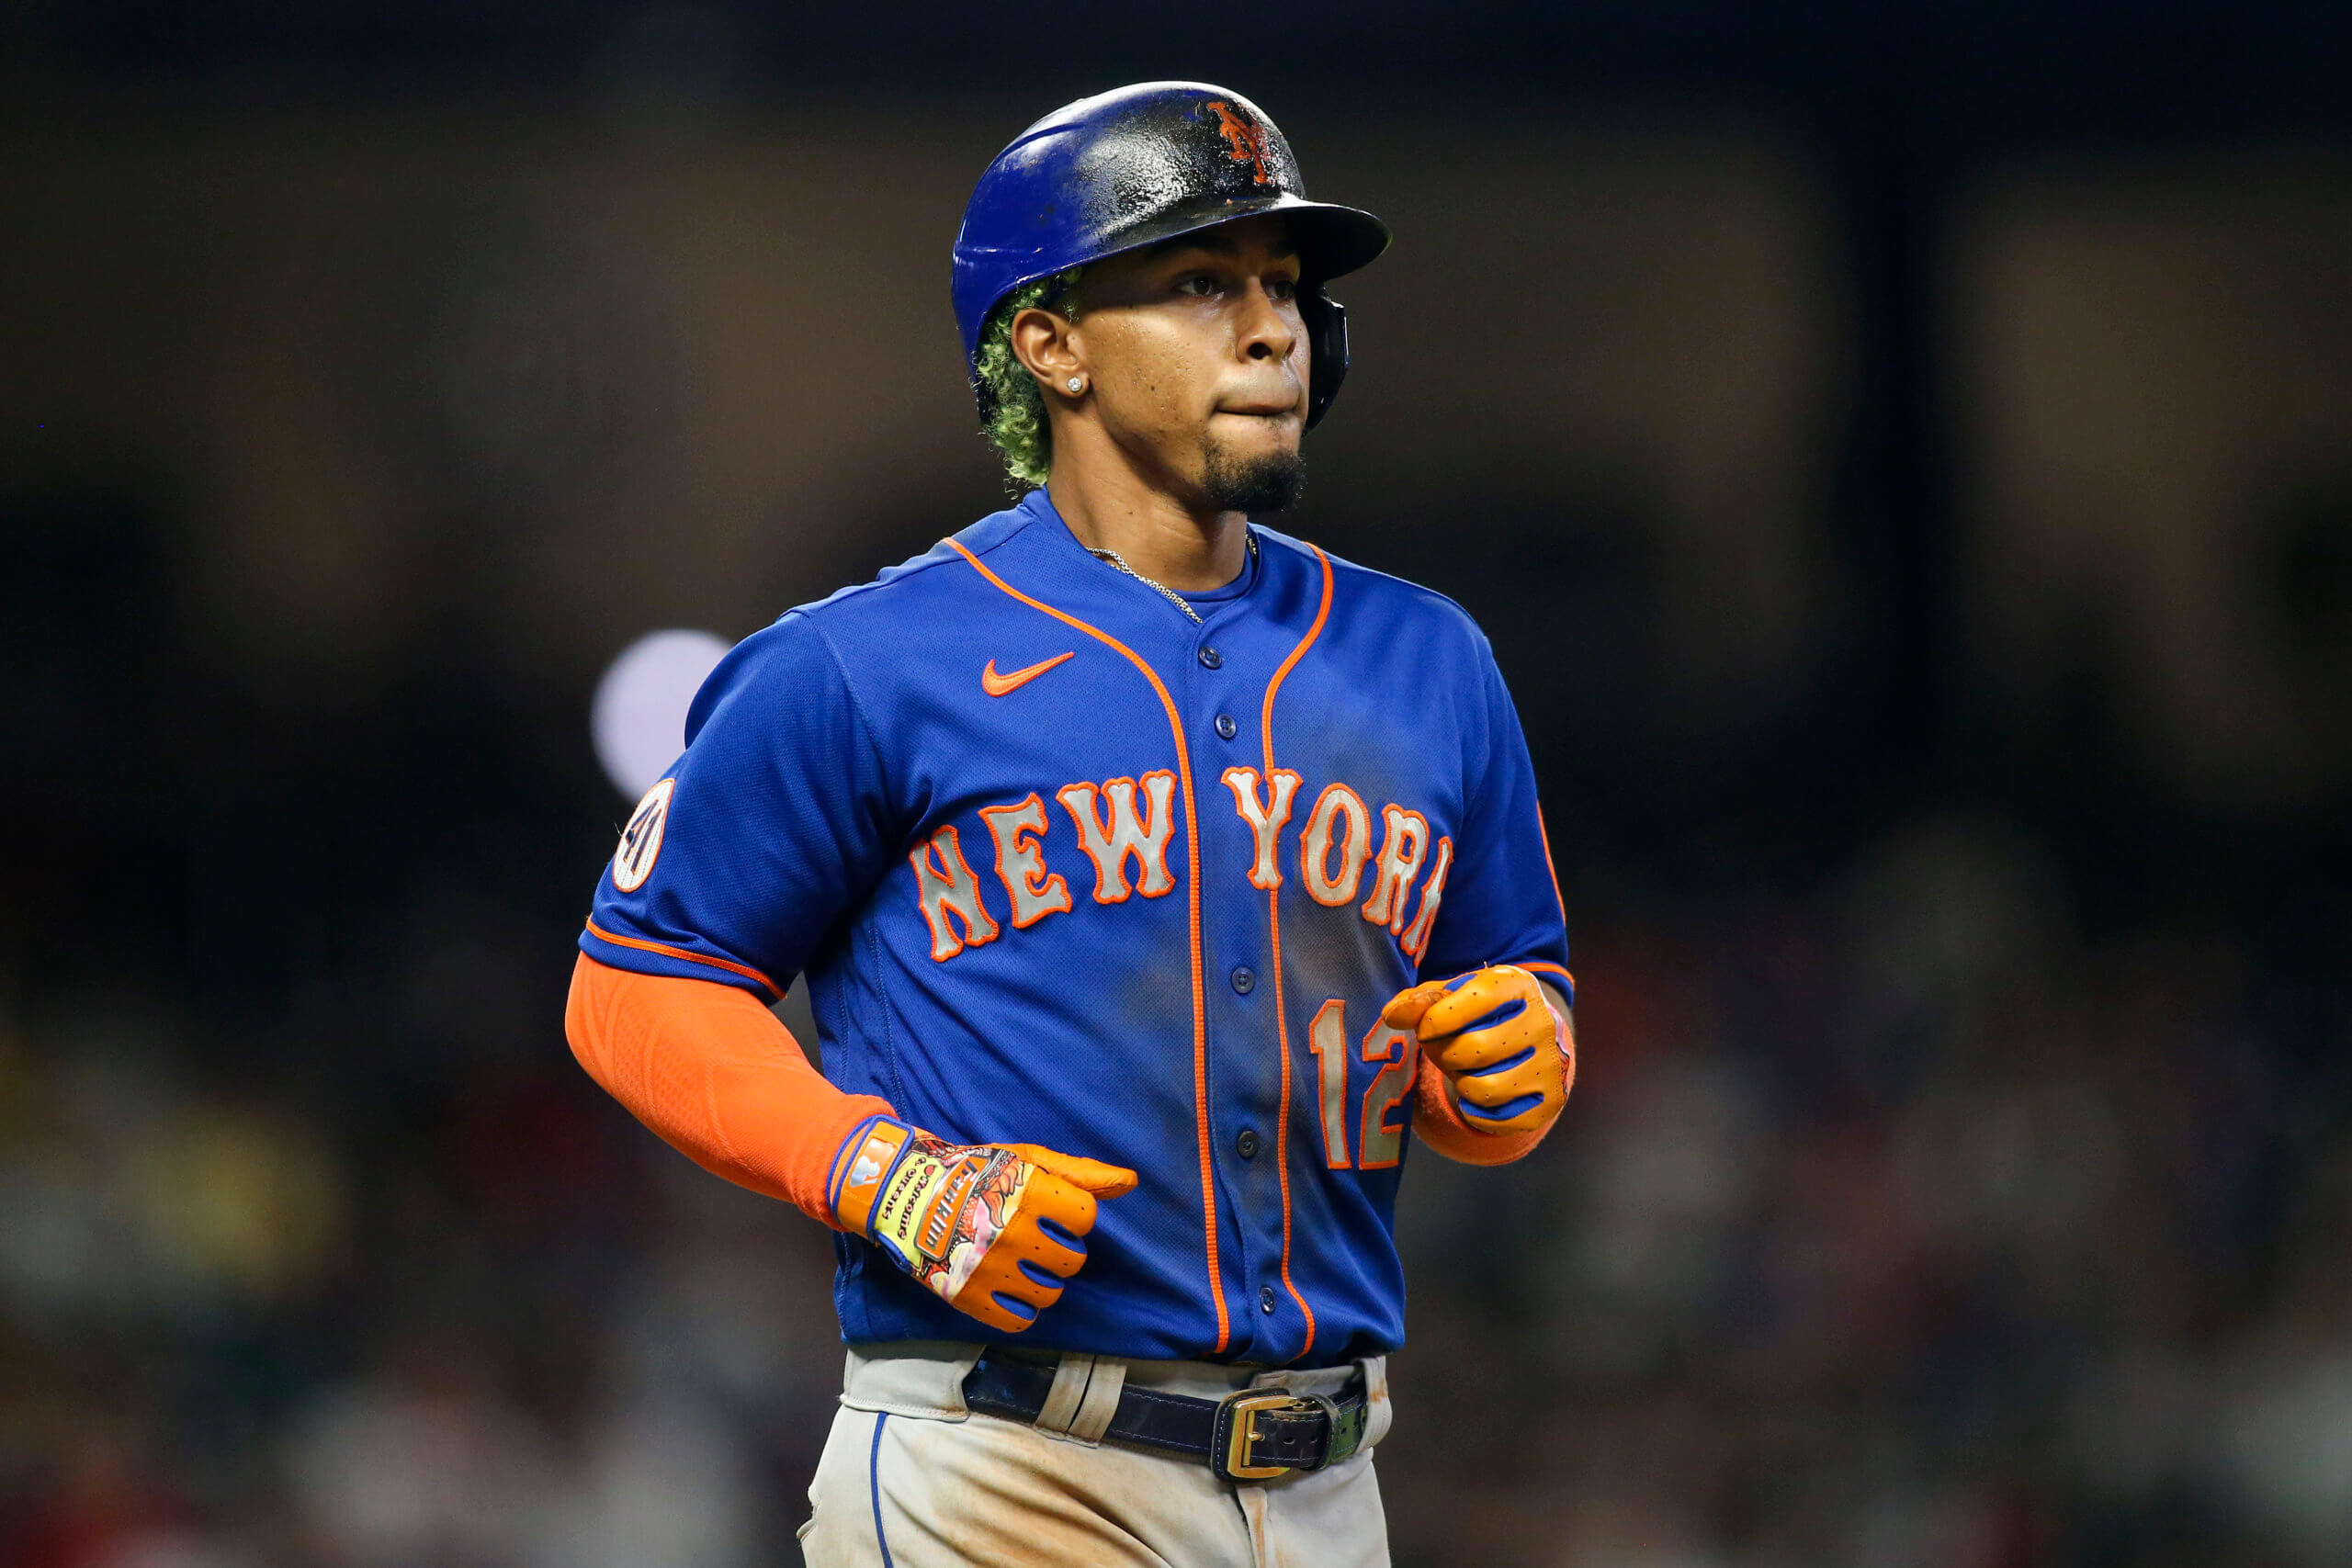 Mets' Francisco Lindor says he'll be a 'bad mother f-er' when he's